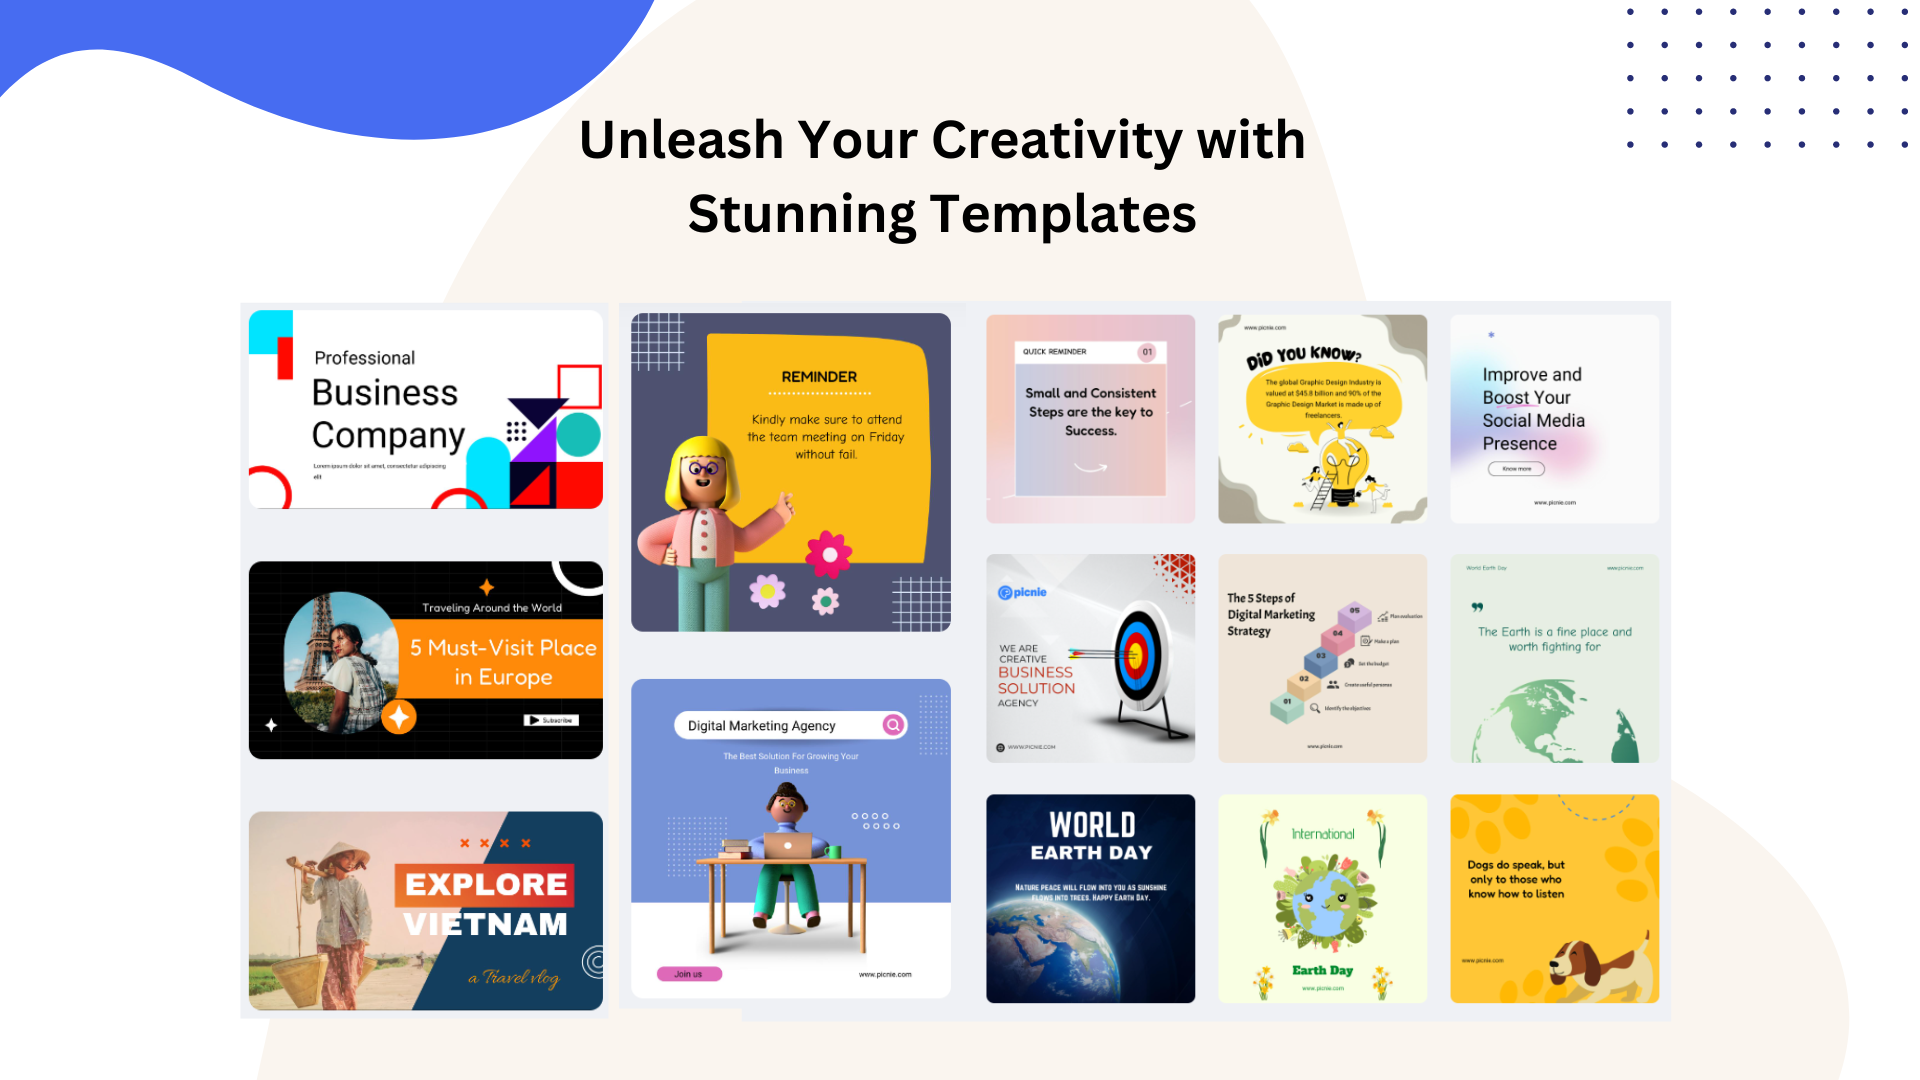 Take your creativity to all new heights with a variety of templates at your disposal.